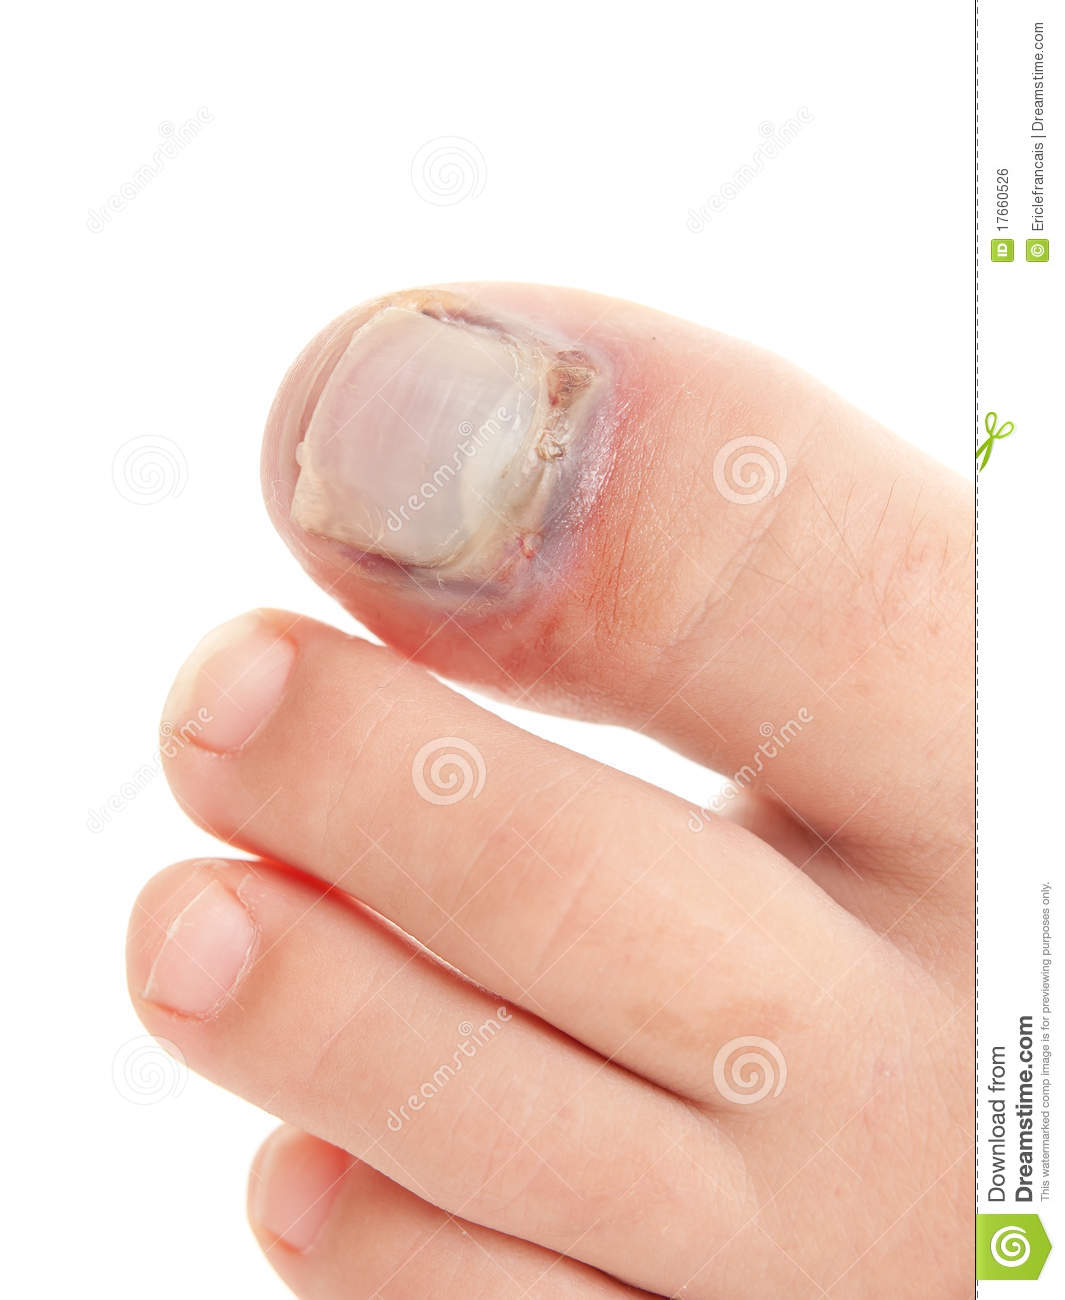 Broken Big Toe With Nail Detachment Royalty Free Stock Image   Image